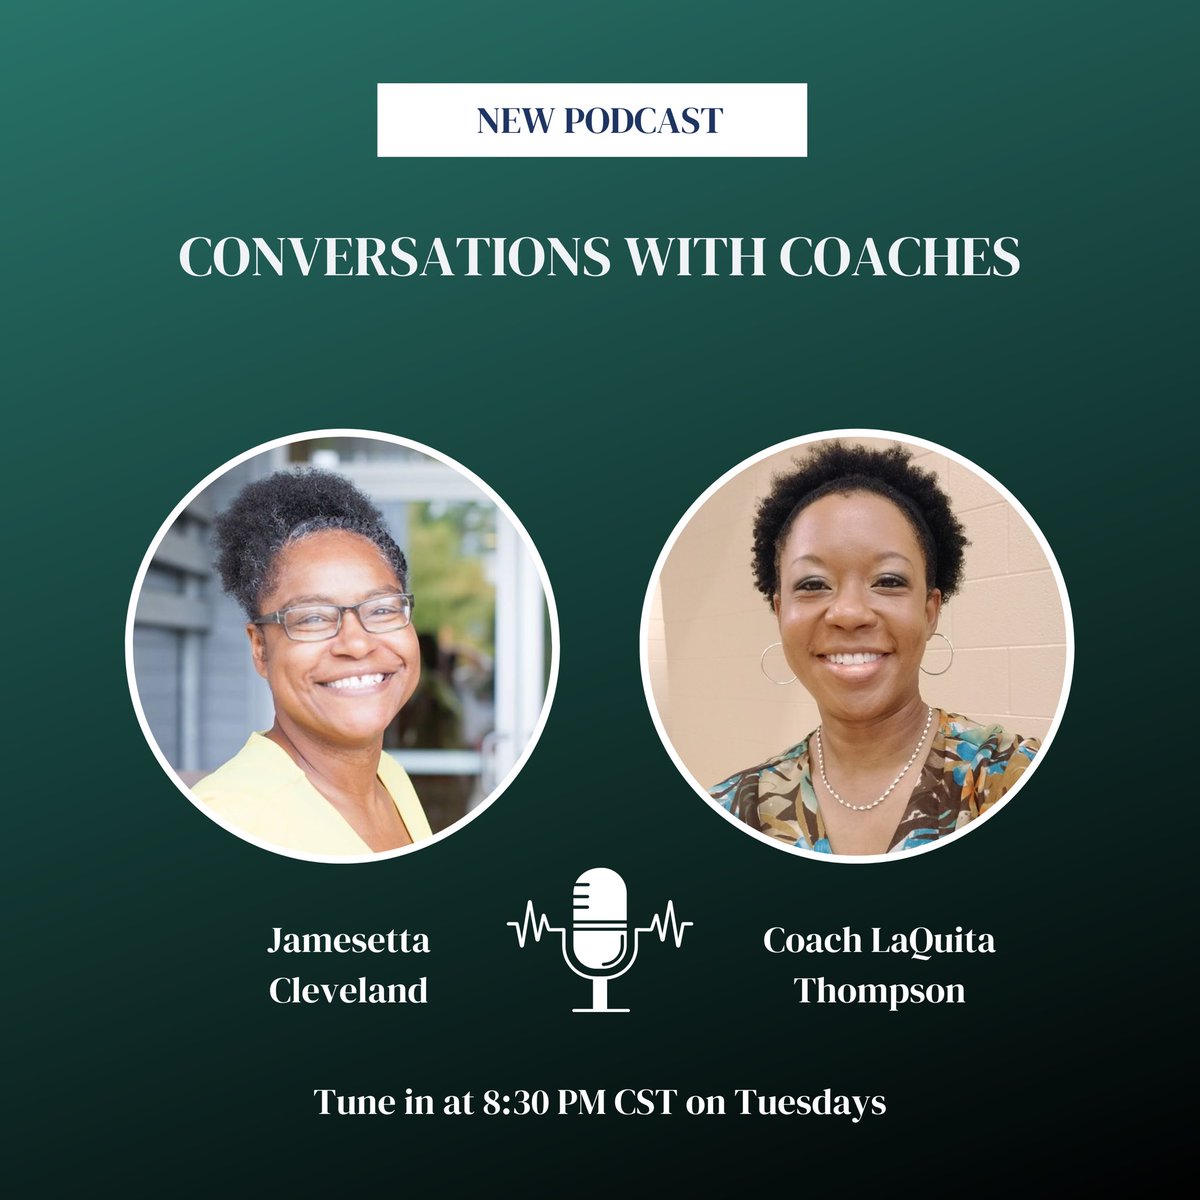 The WNBA Draft is coming. Y’all know what that means?? This week, I’m bringing out the heavy hitters on my podcasts! Join me, Tuesday night at 8:30pm CST for Conversations with Coaches. 1/2